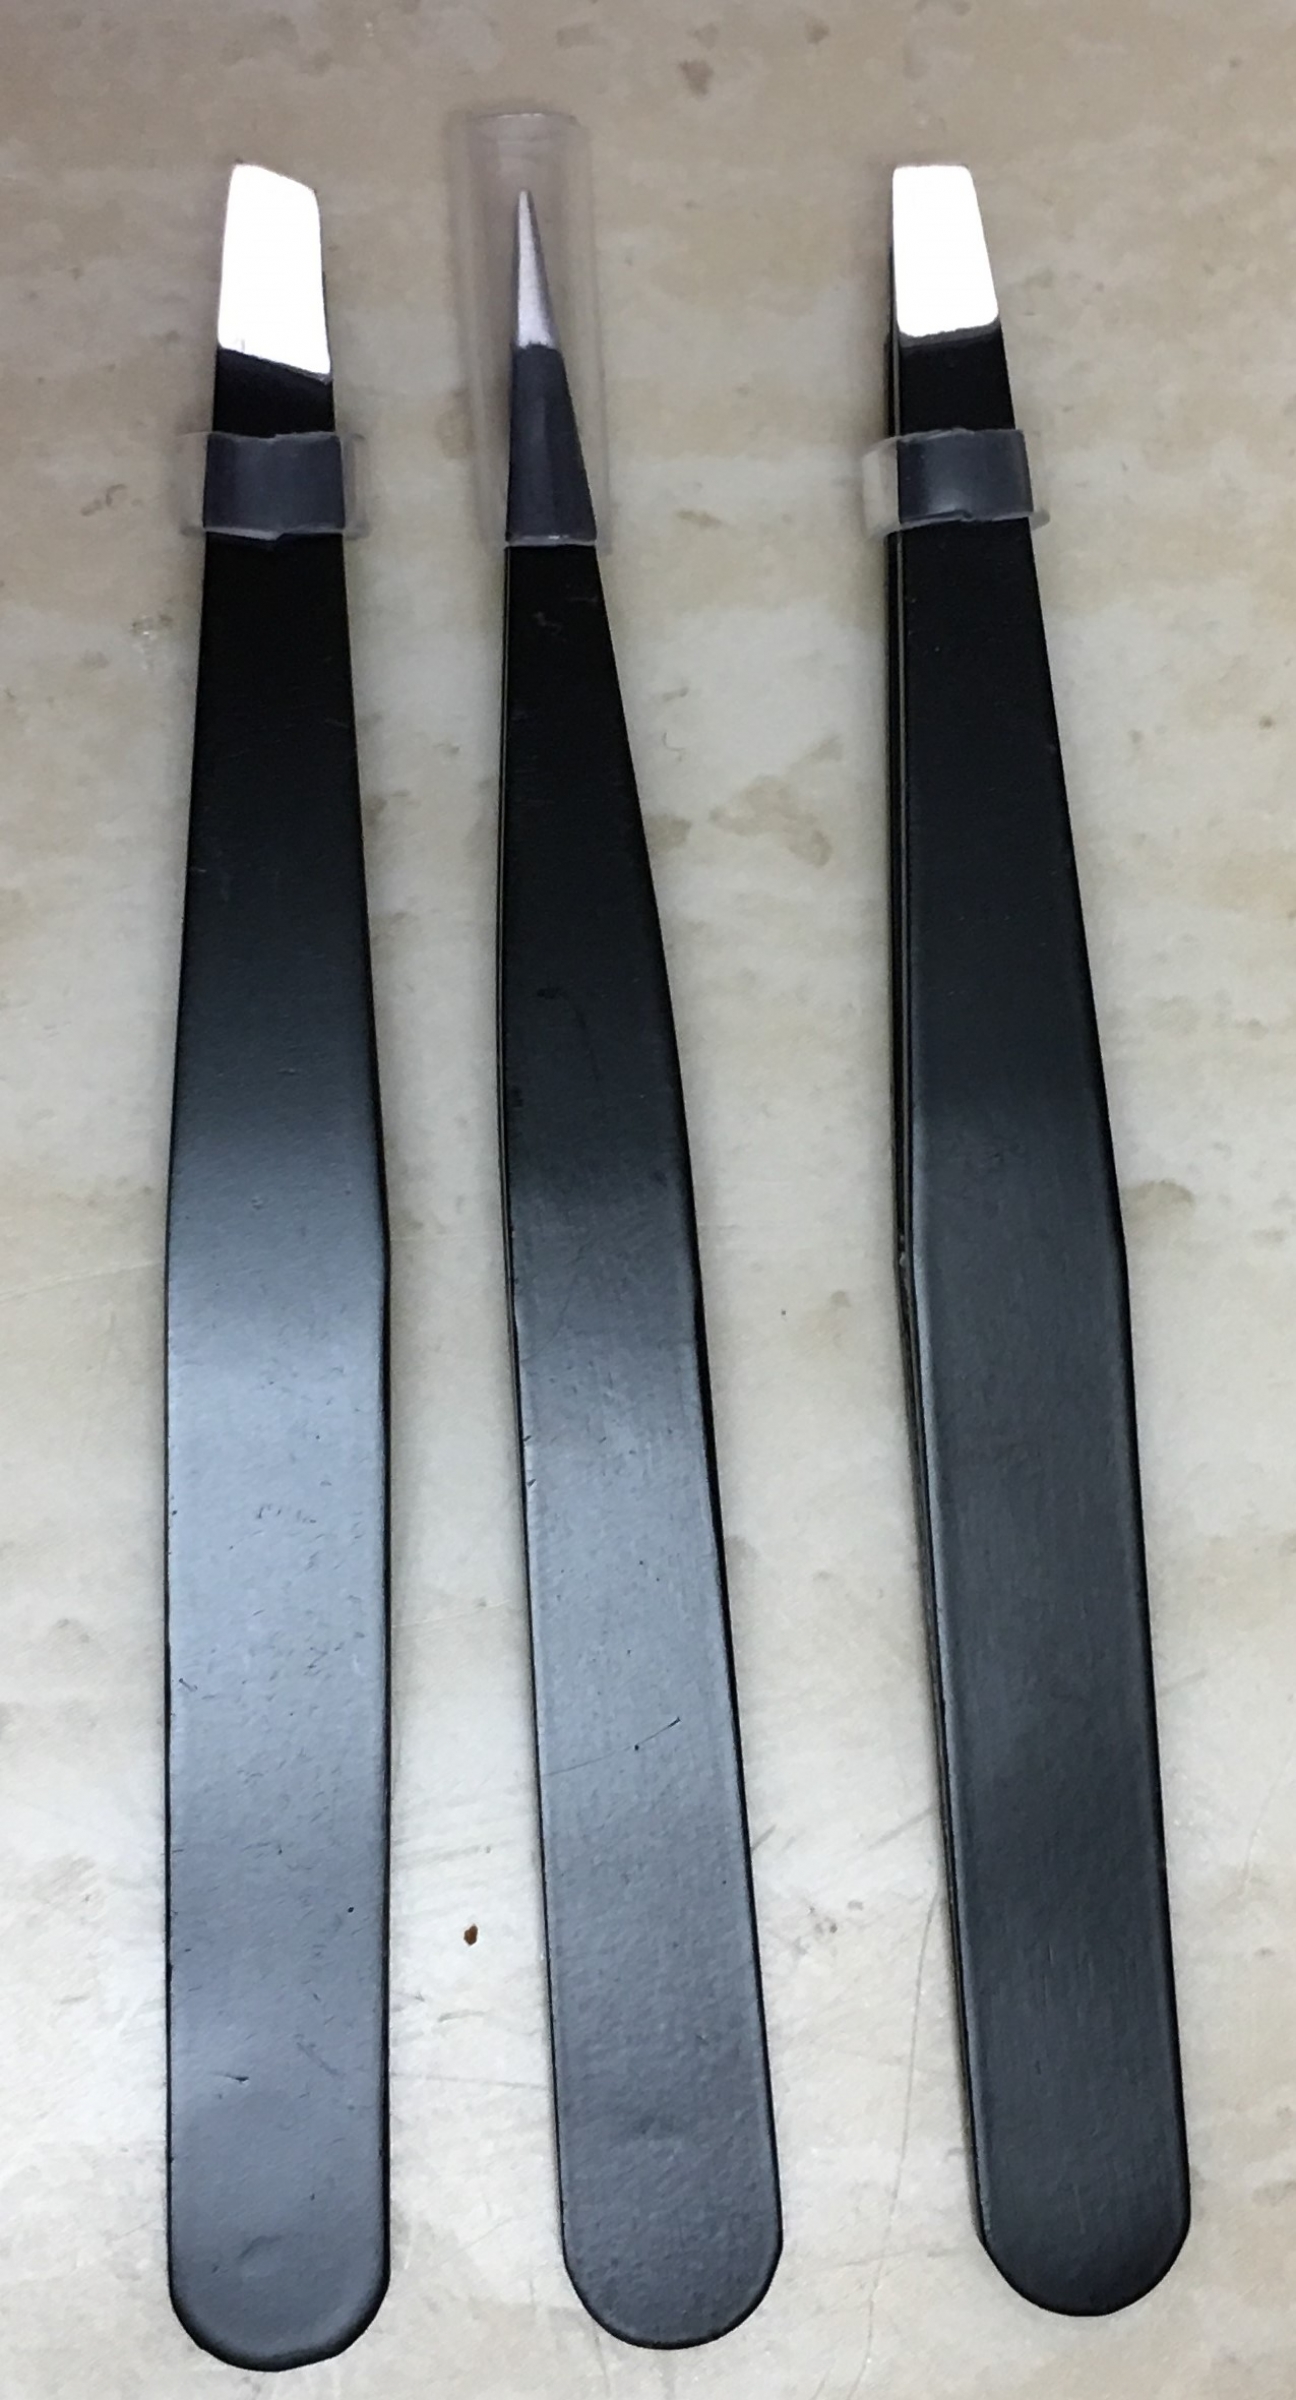 Set of 3 Stainless Steel Tweezers with a carrying pouch